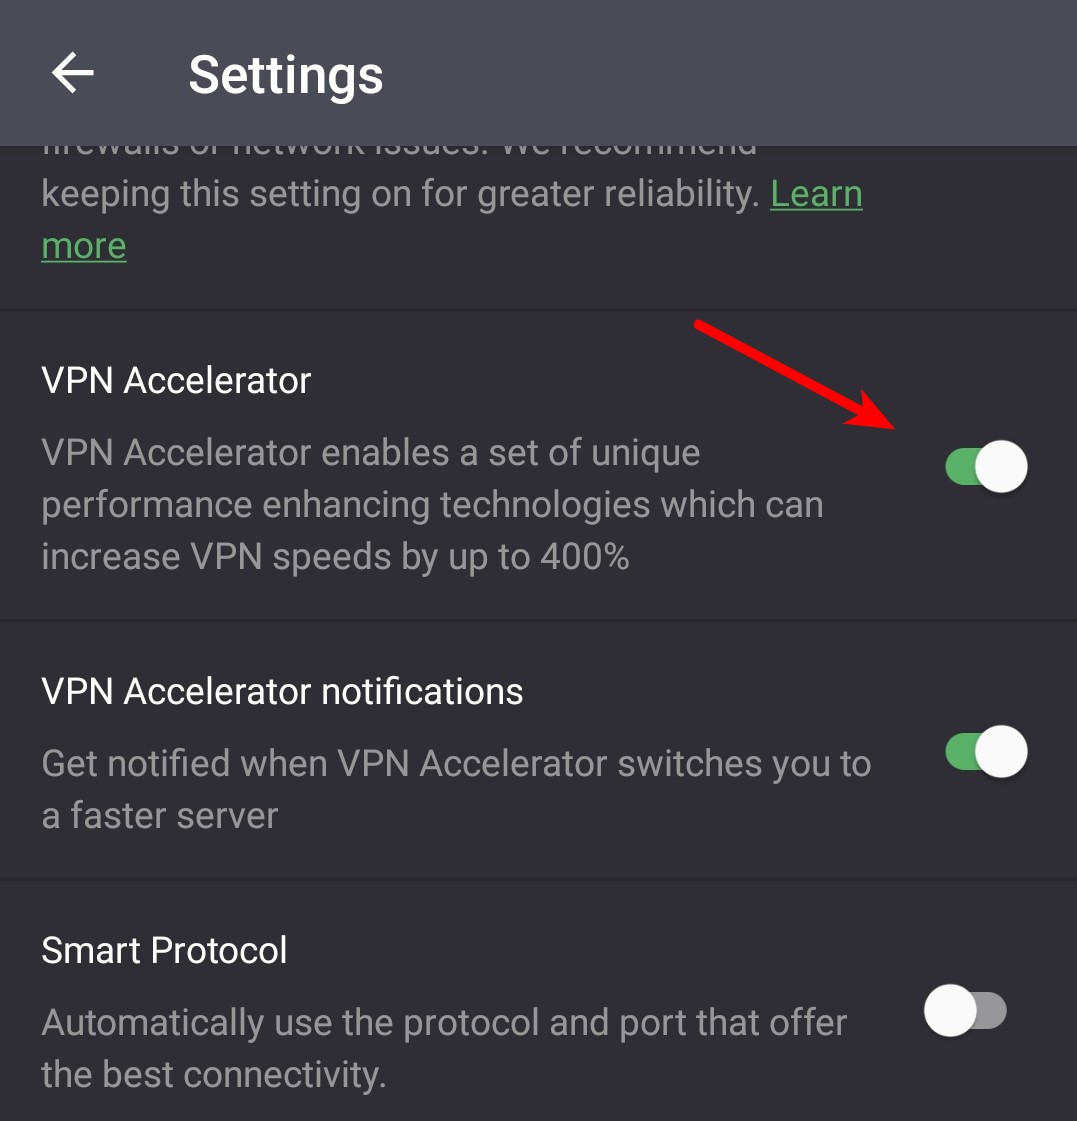 How to enable or disable VPN Accelerator on Android